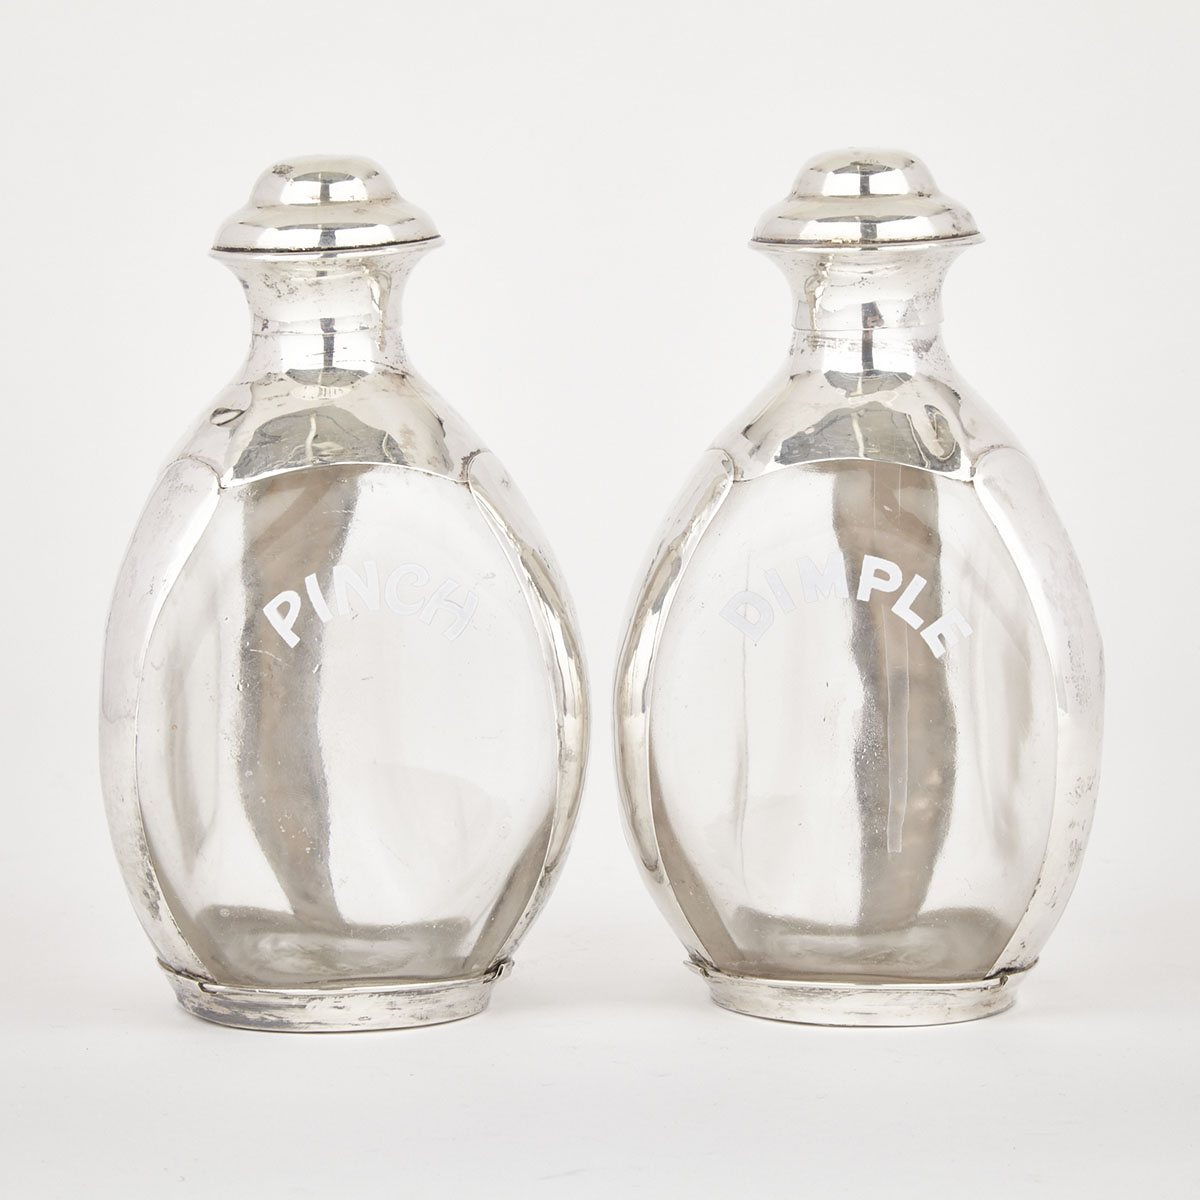 Pair of Mexican Silver Mounted Haig’s Scotch Whiskey Bottles, 20th century